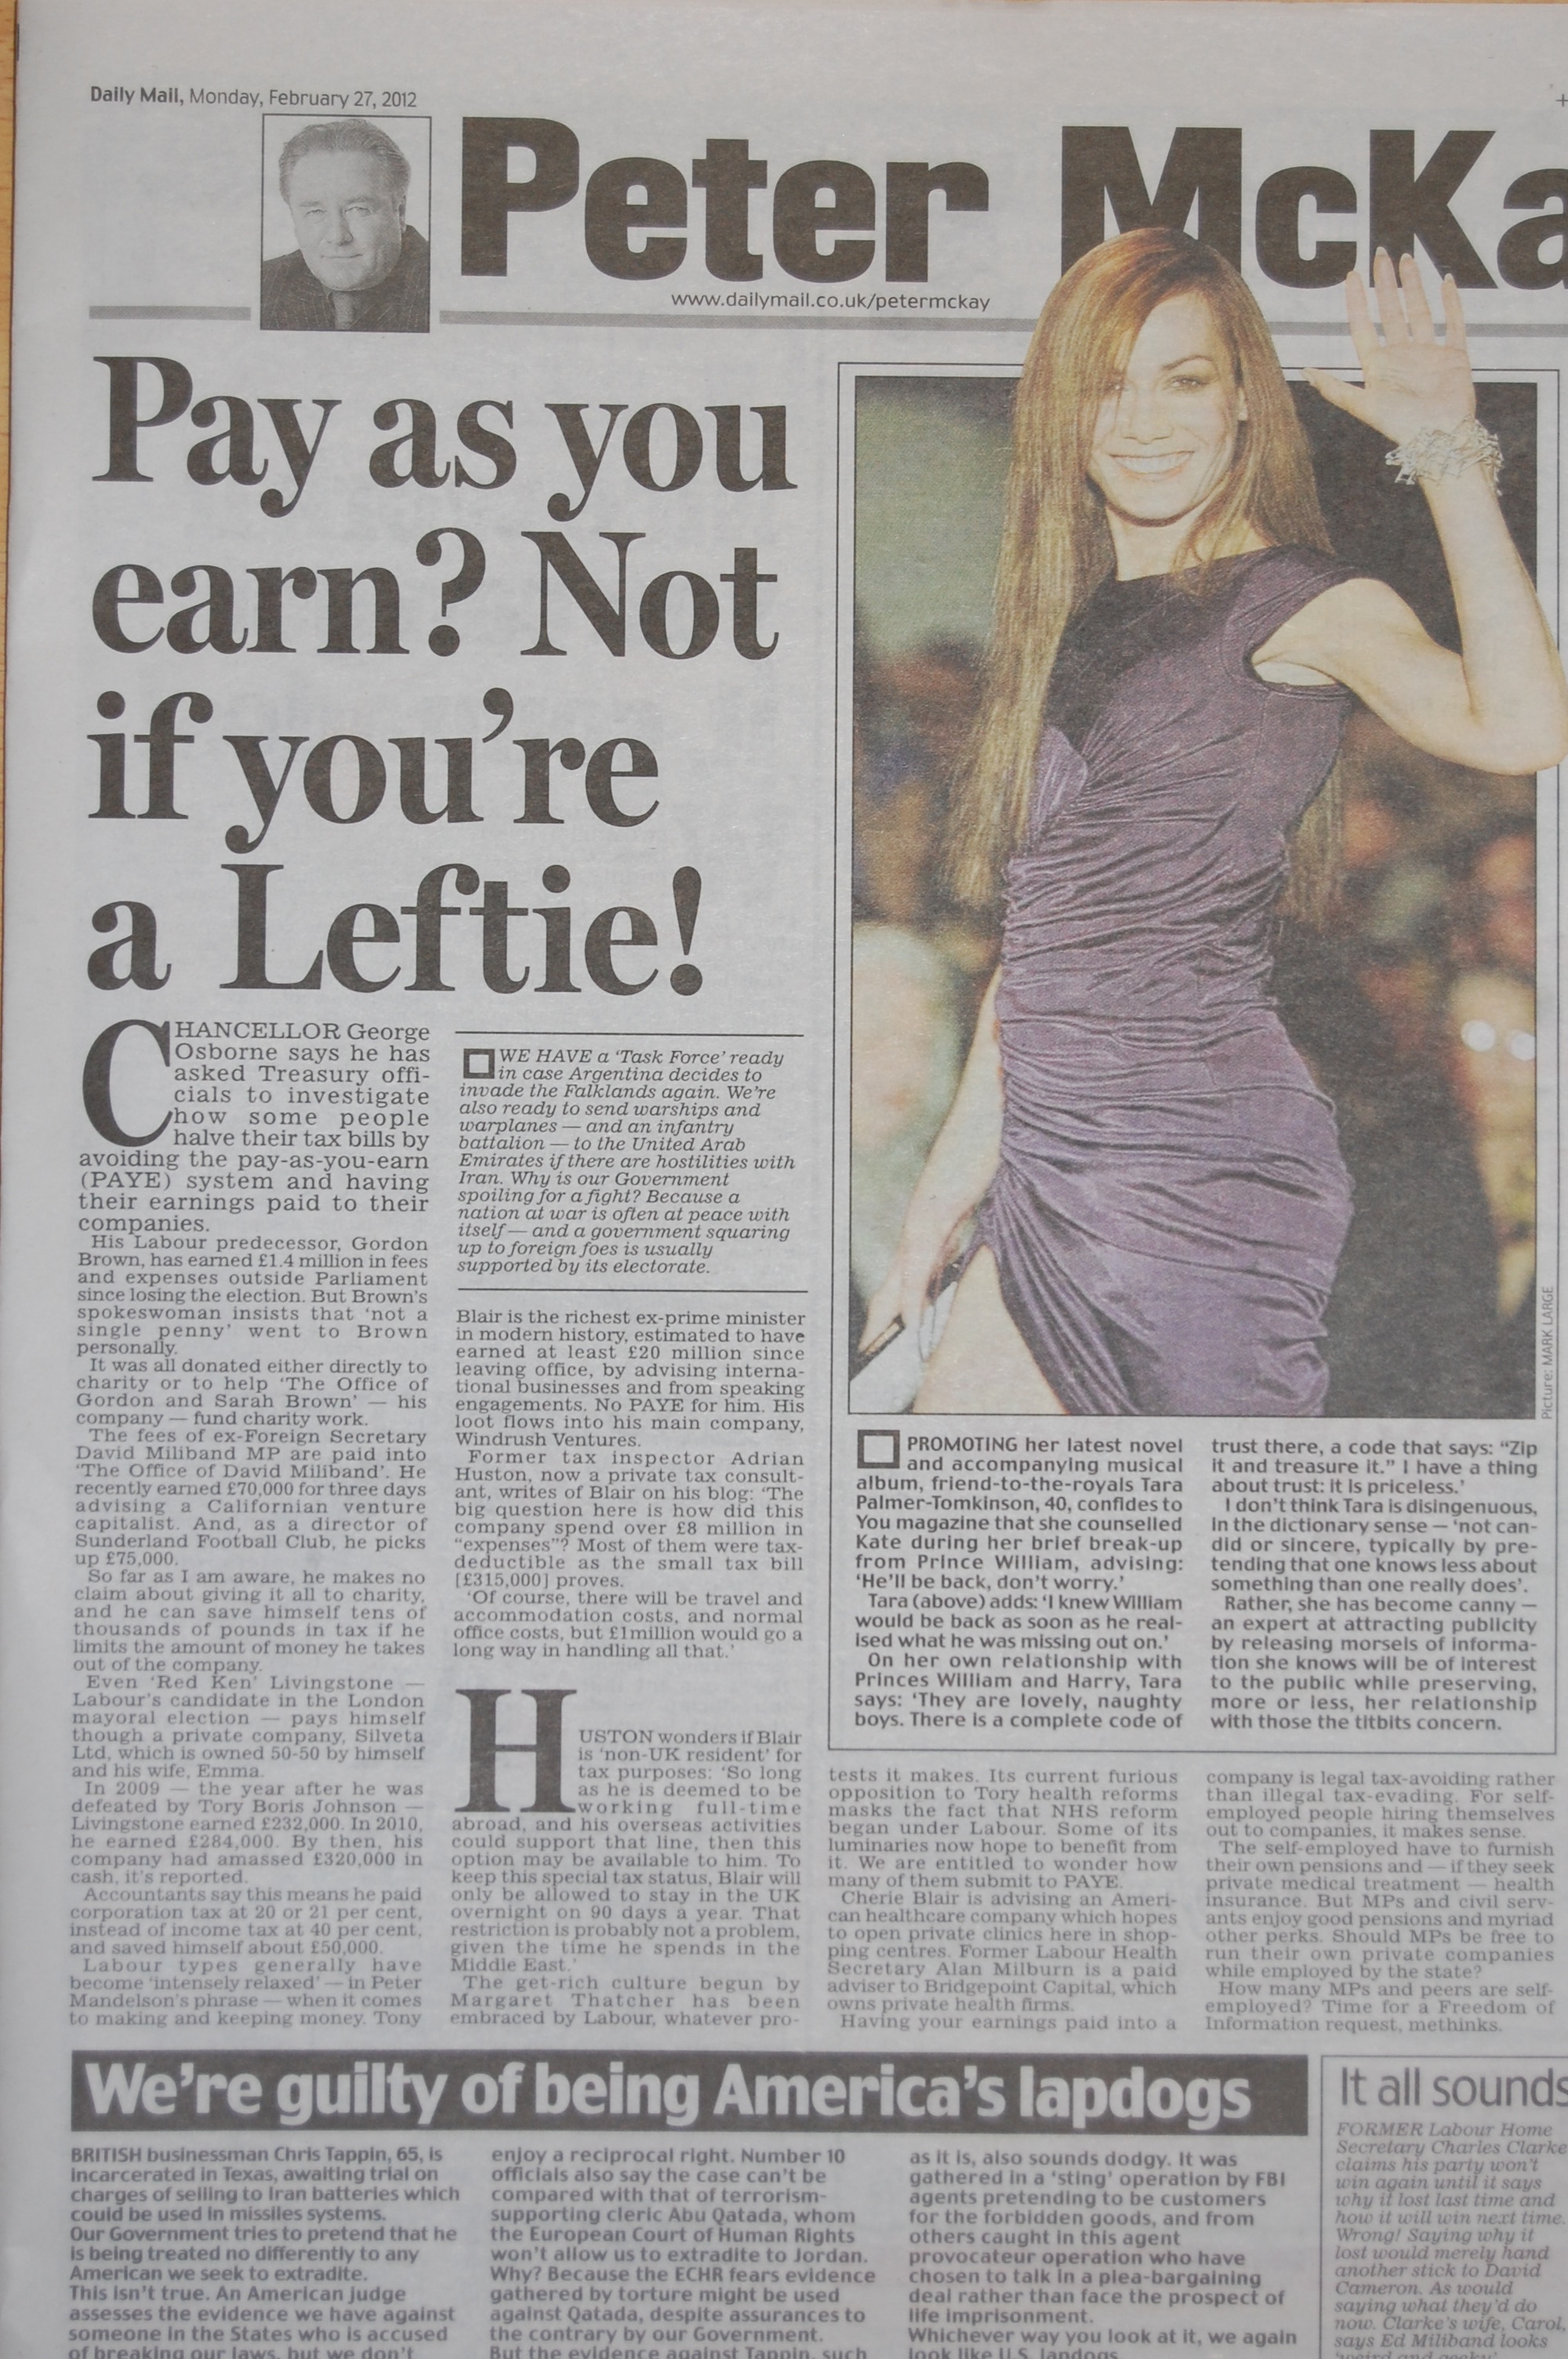 Huston article on Tony Blair's tax quoted in daily mail